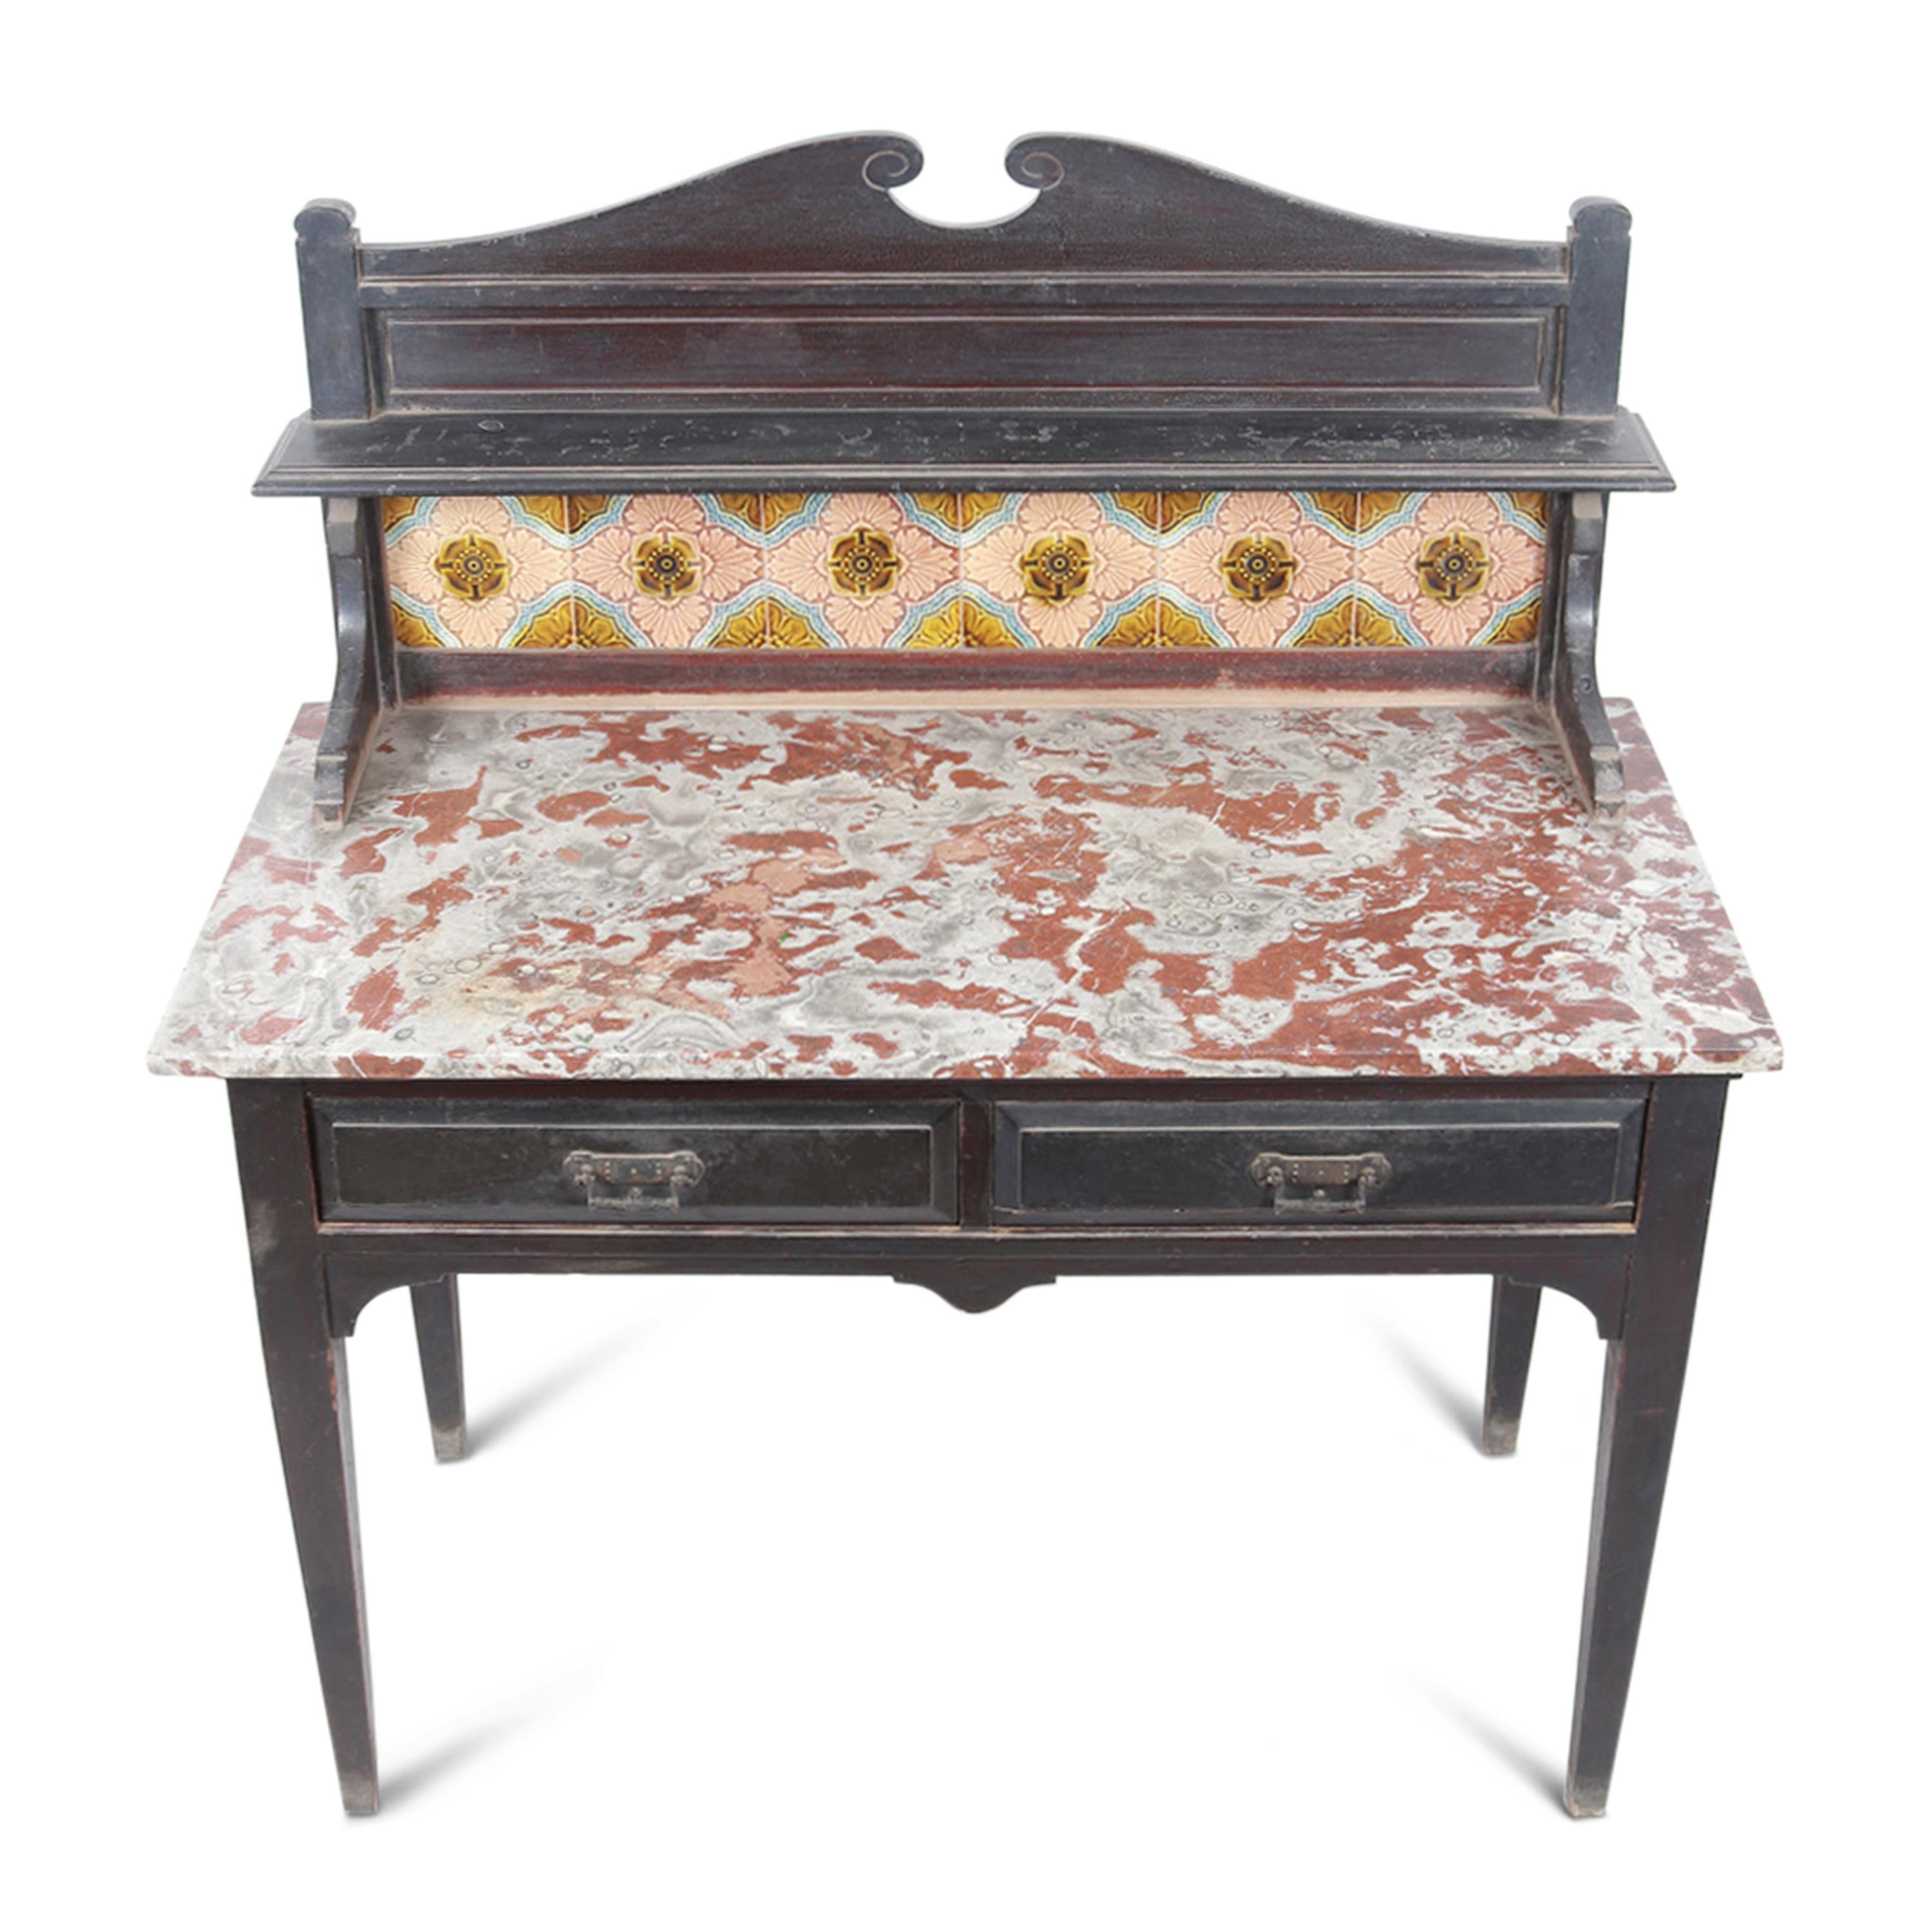 Victorian Era Marble Topped Table In Good Condition For Sale In West Hollywood, CA